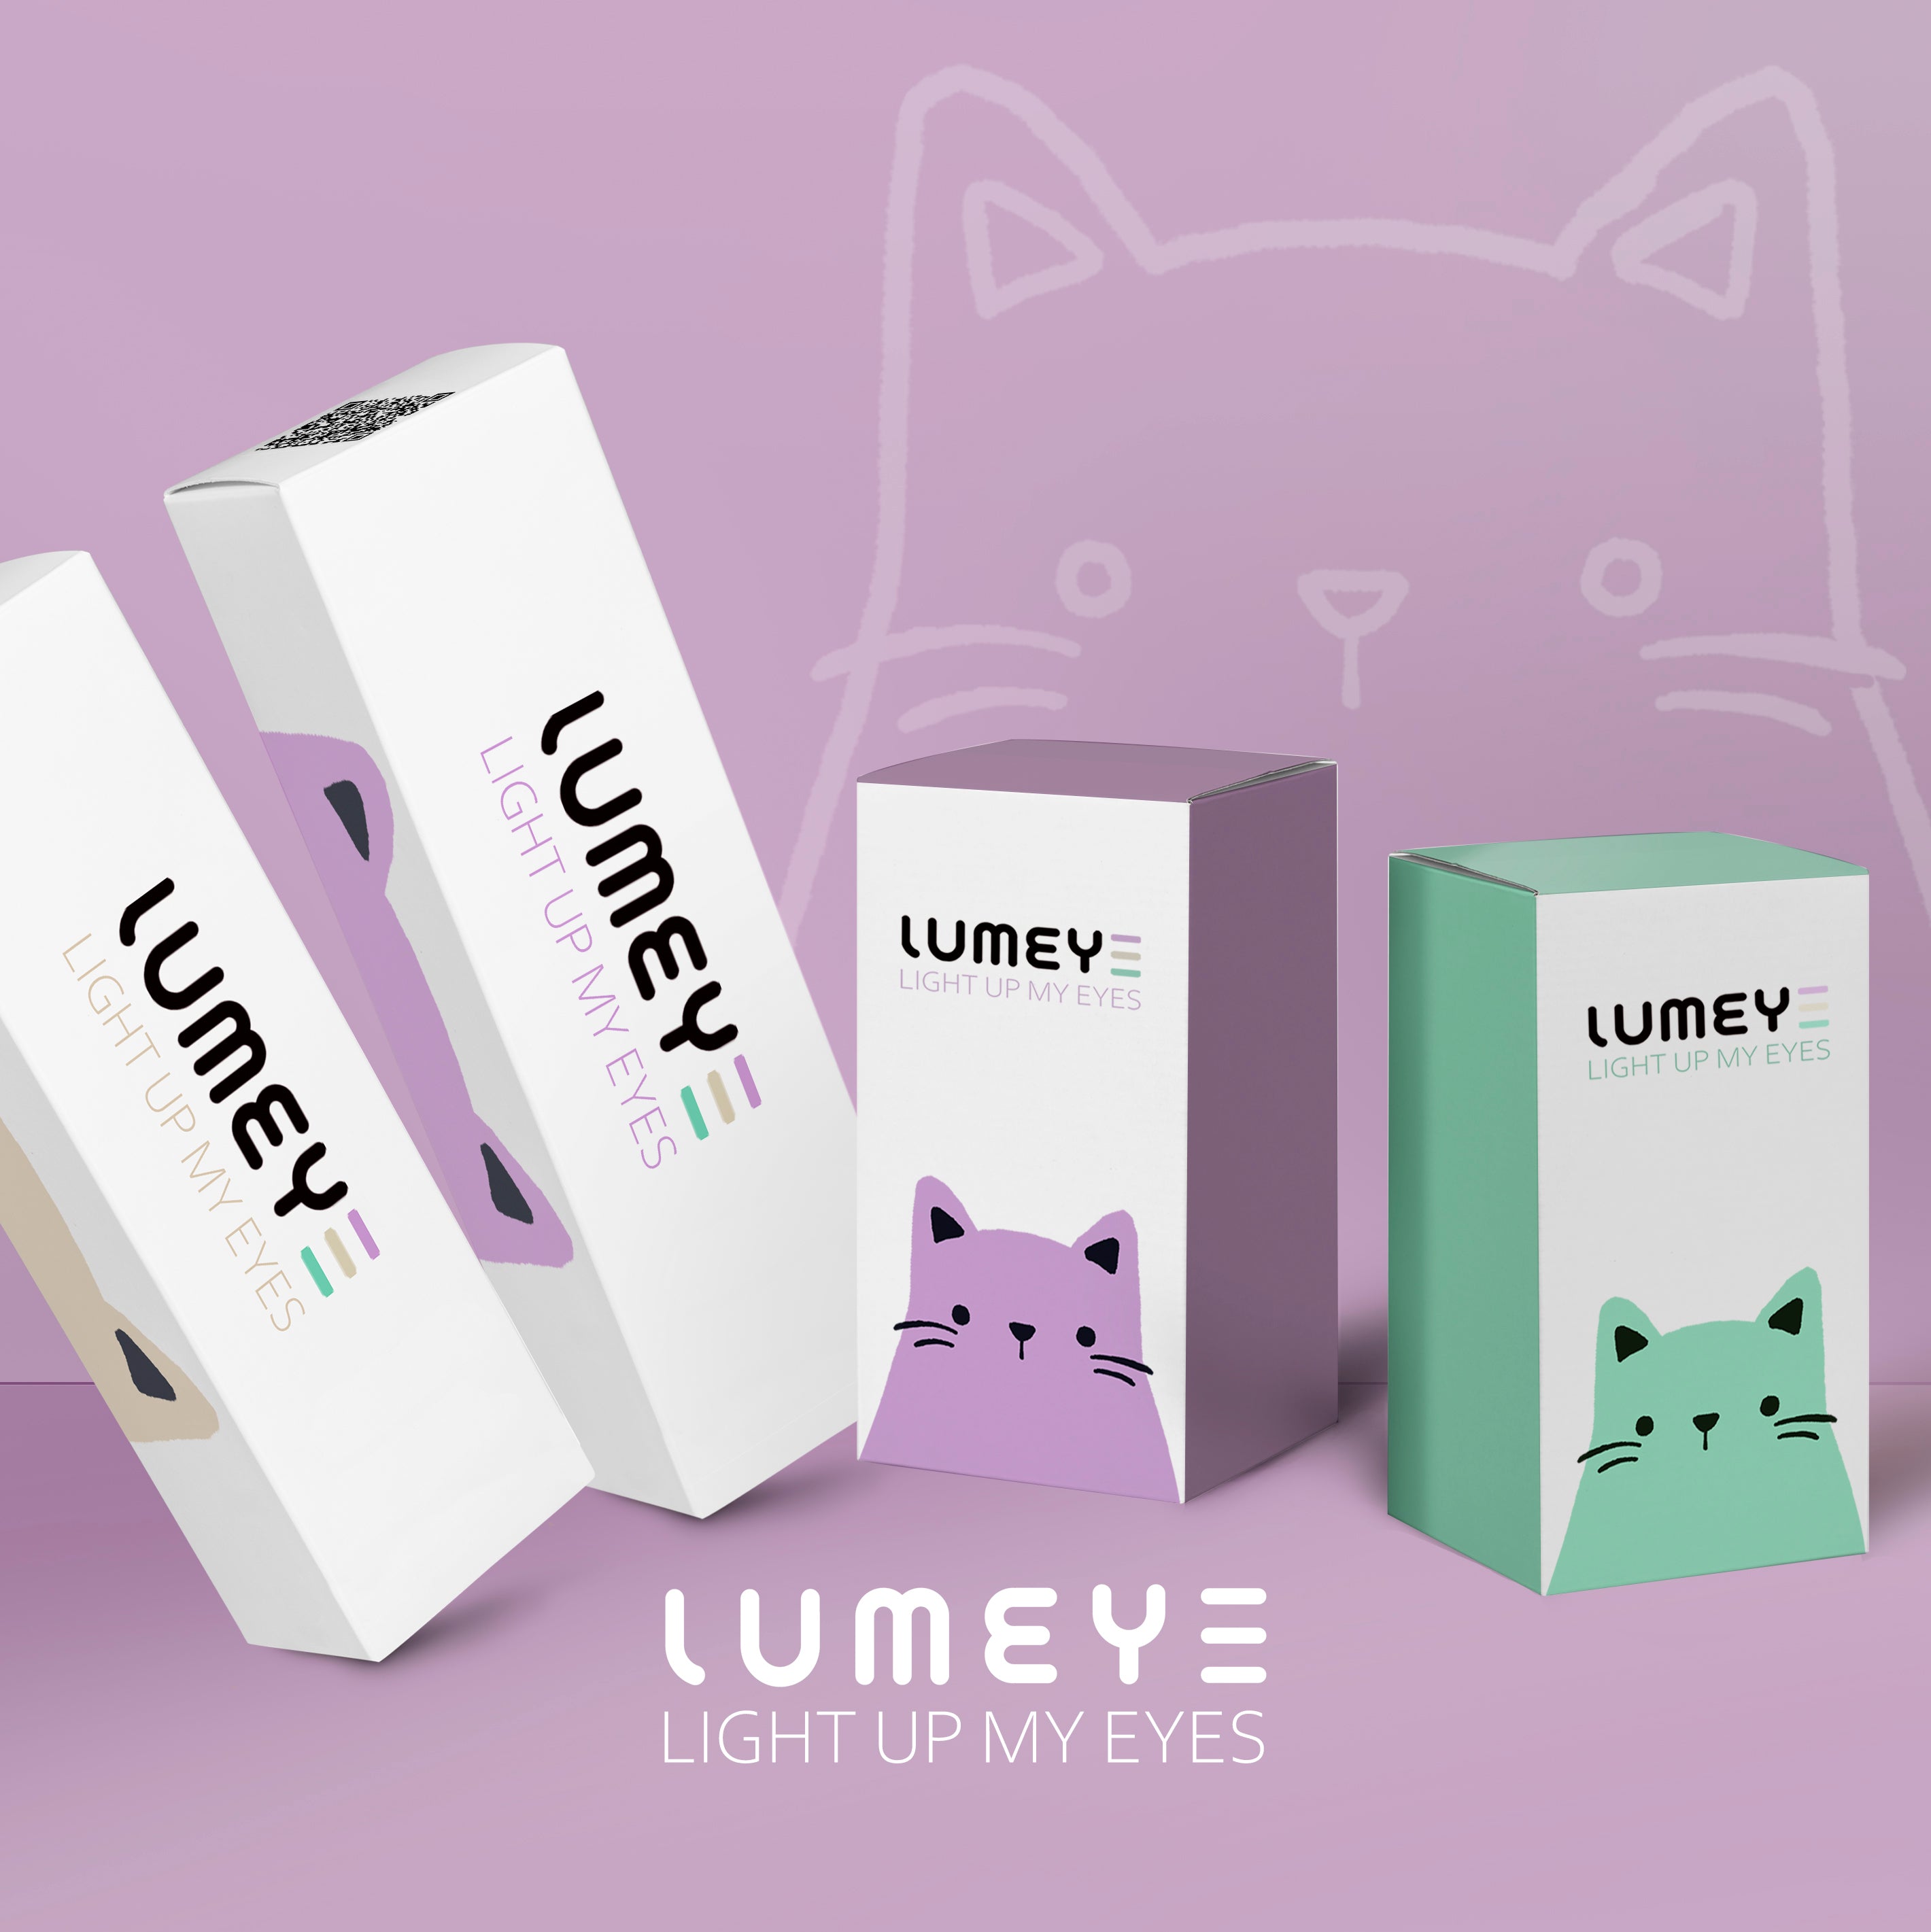 Best COLORED CONTACTS - LUMEYE Mystery Purple Colored Contact Lenses - LUMEYE